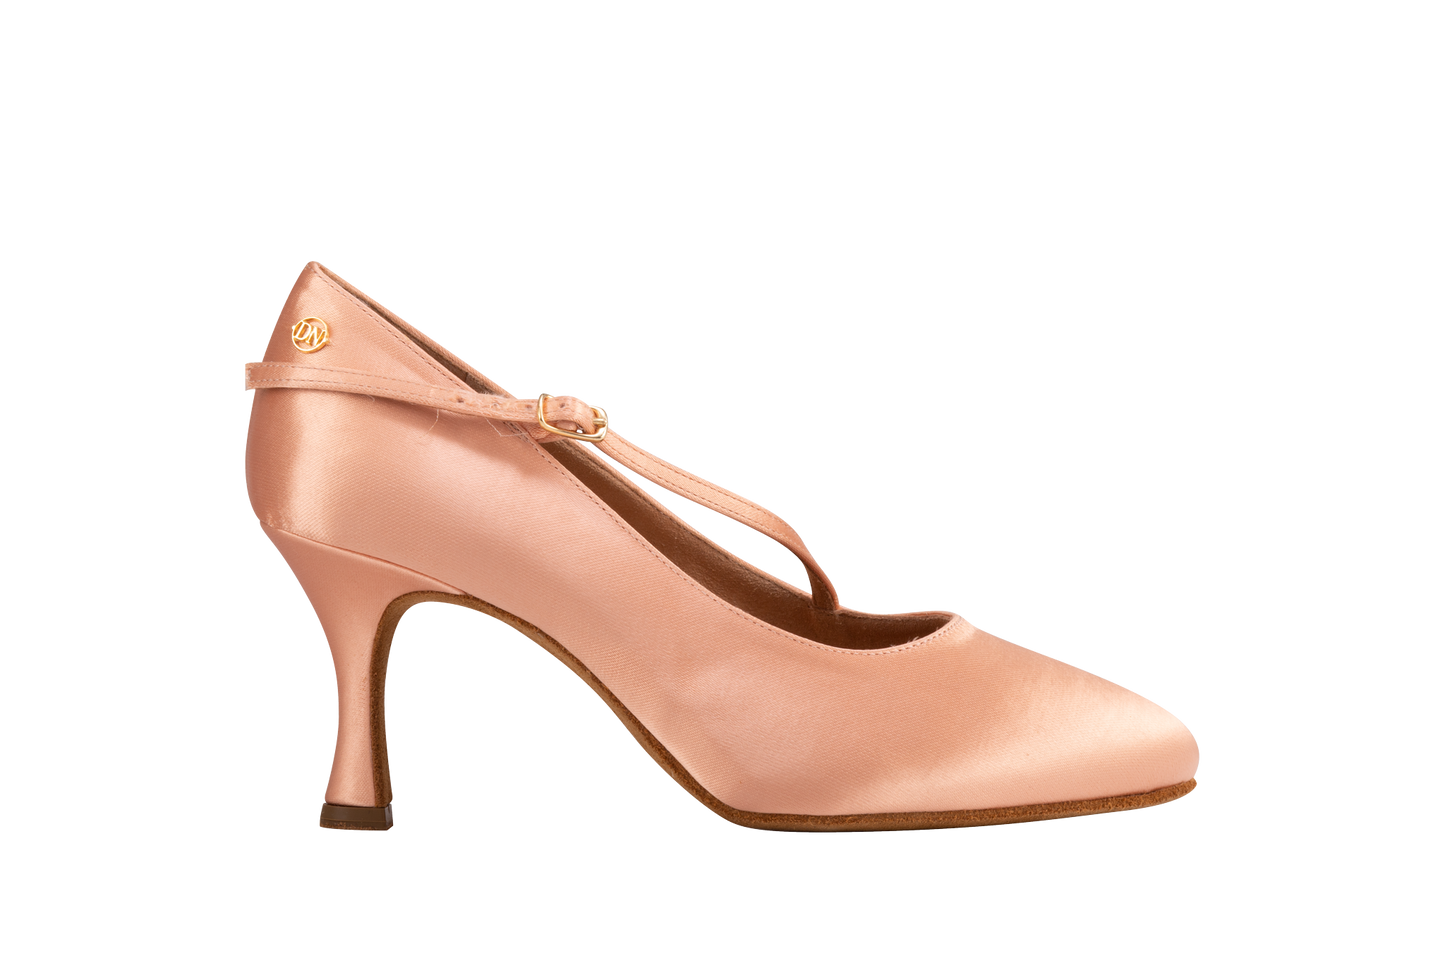 Dance Naturals 220 Elena Flesh Satin Ladies Ballroom Dance Shoe with Rounded Toe and Diagonal Strap